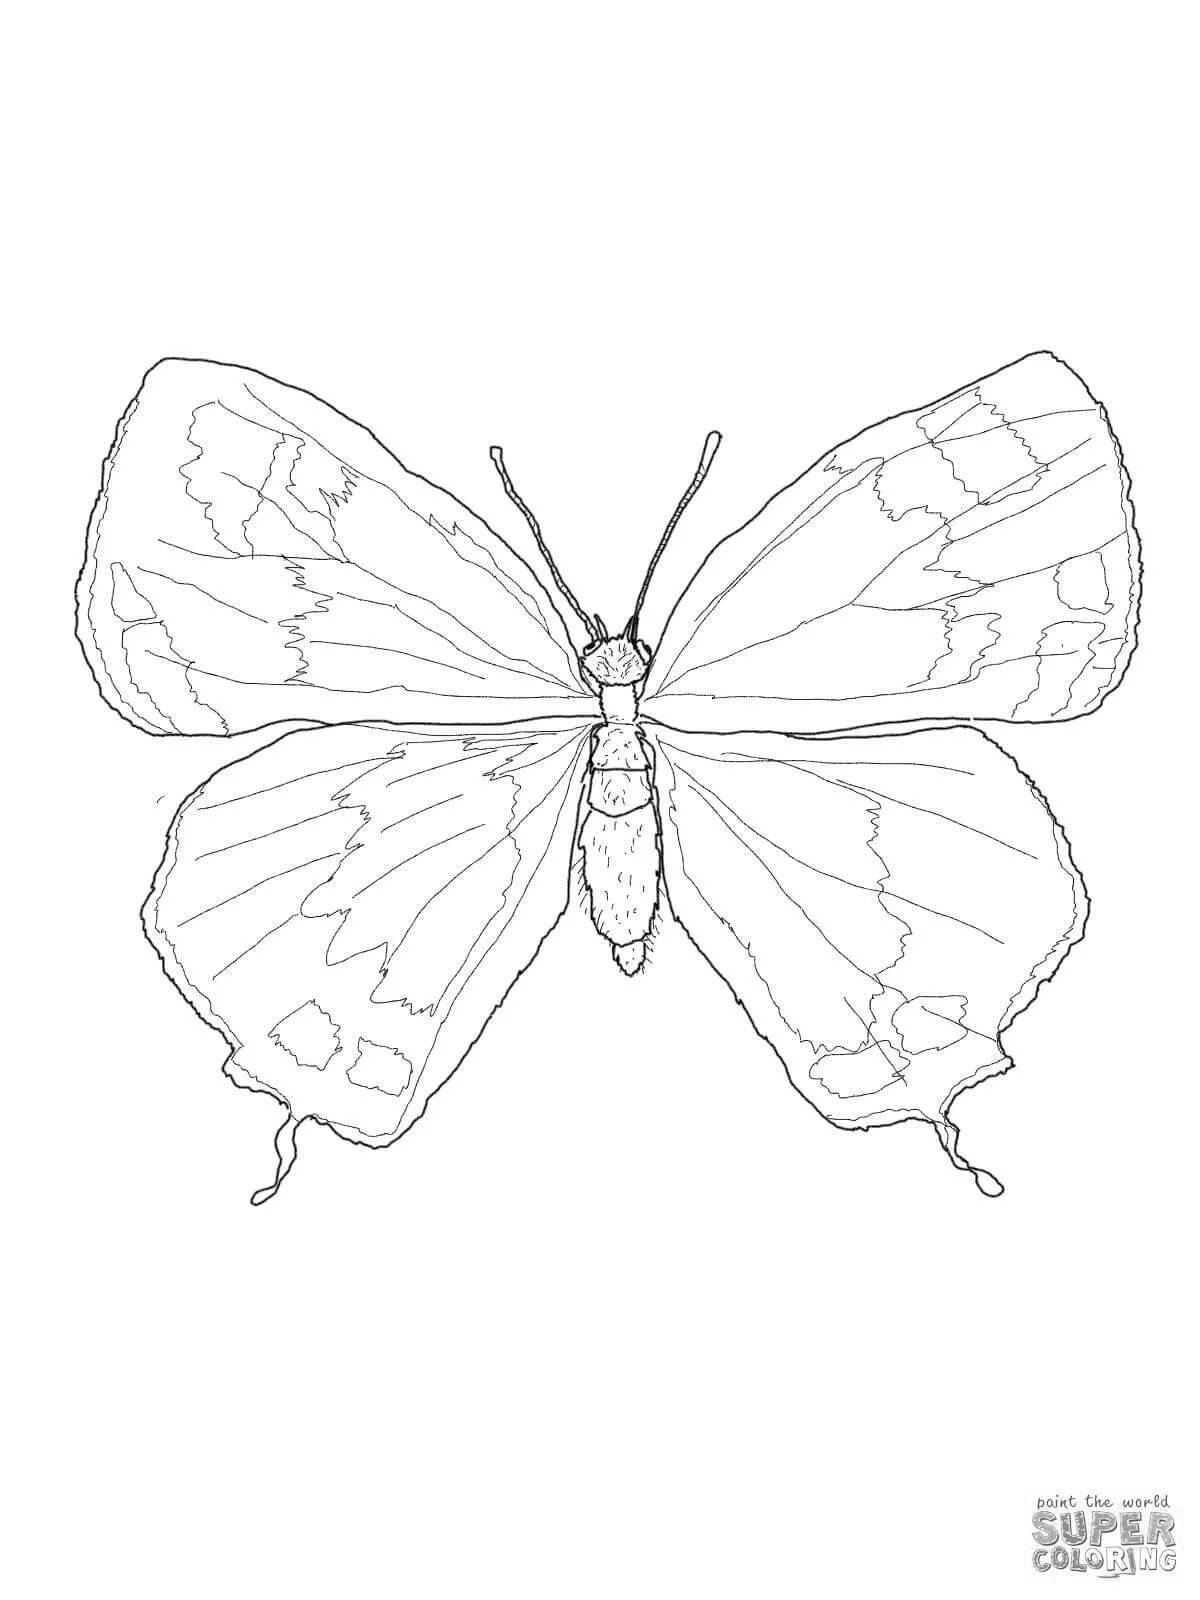 Sublime coloring page apollo butterfly